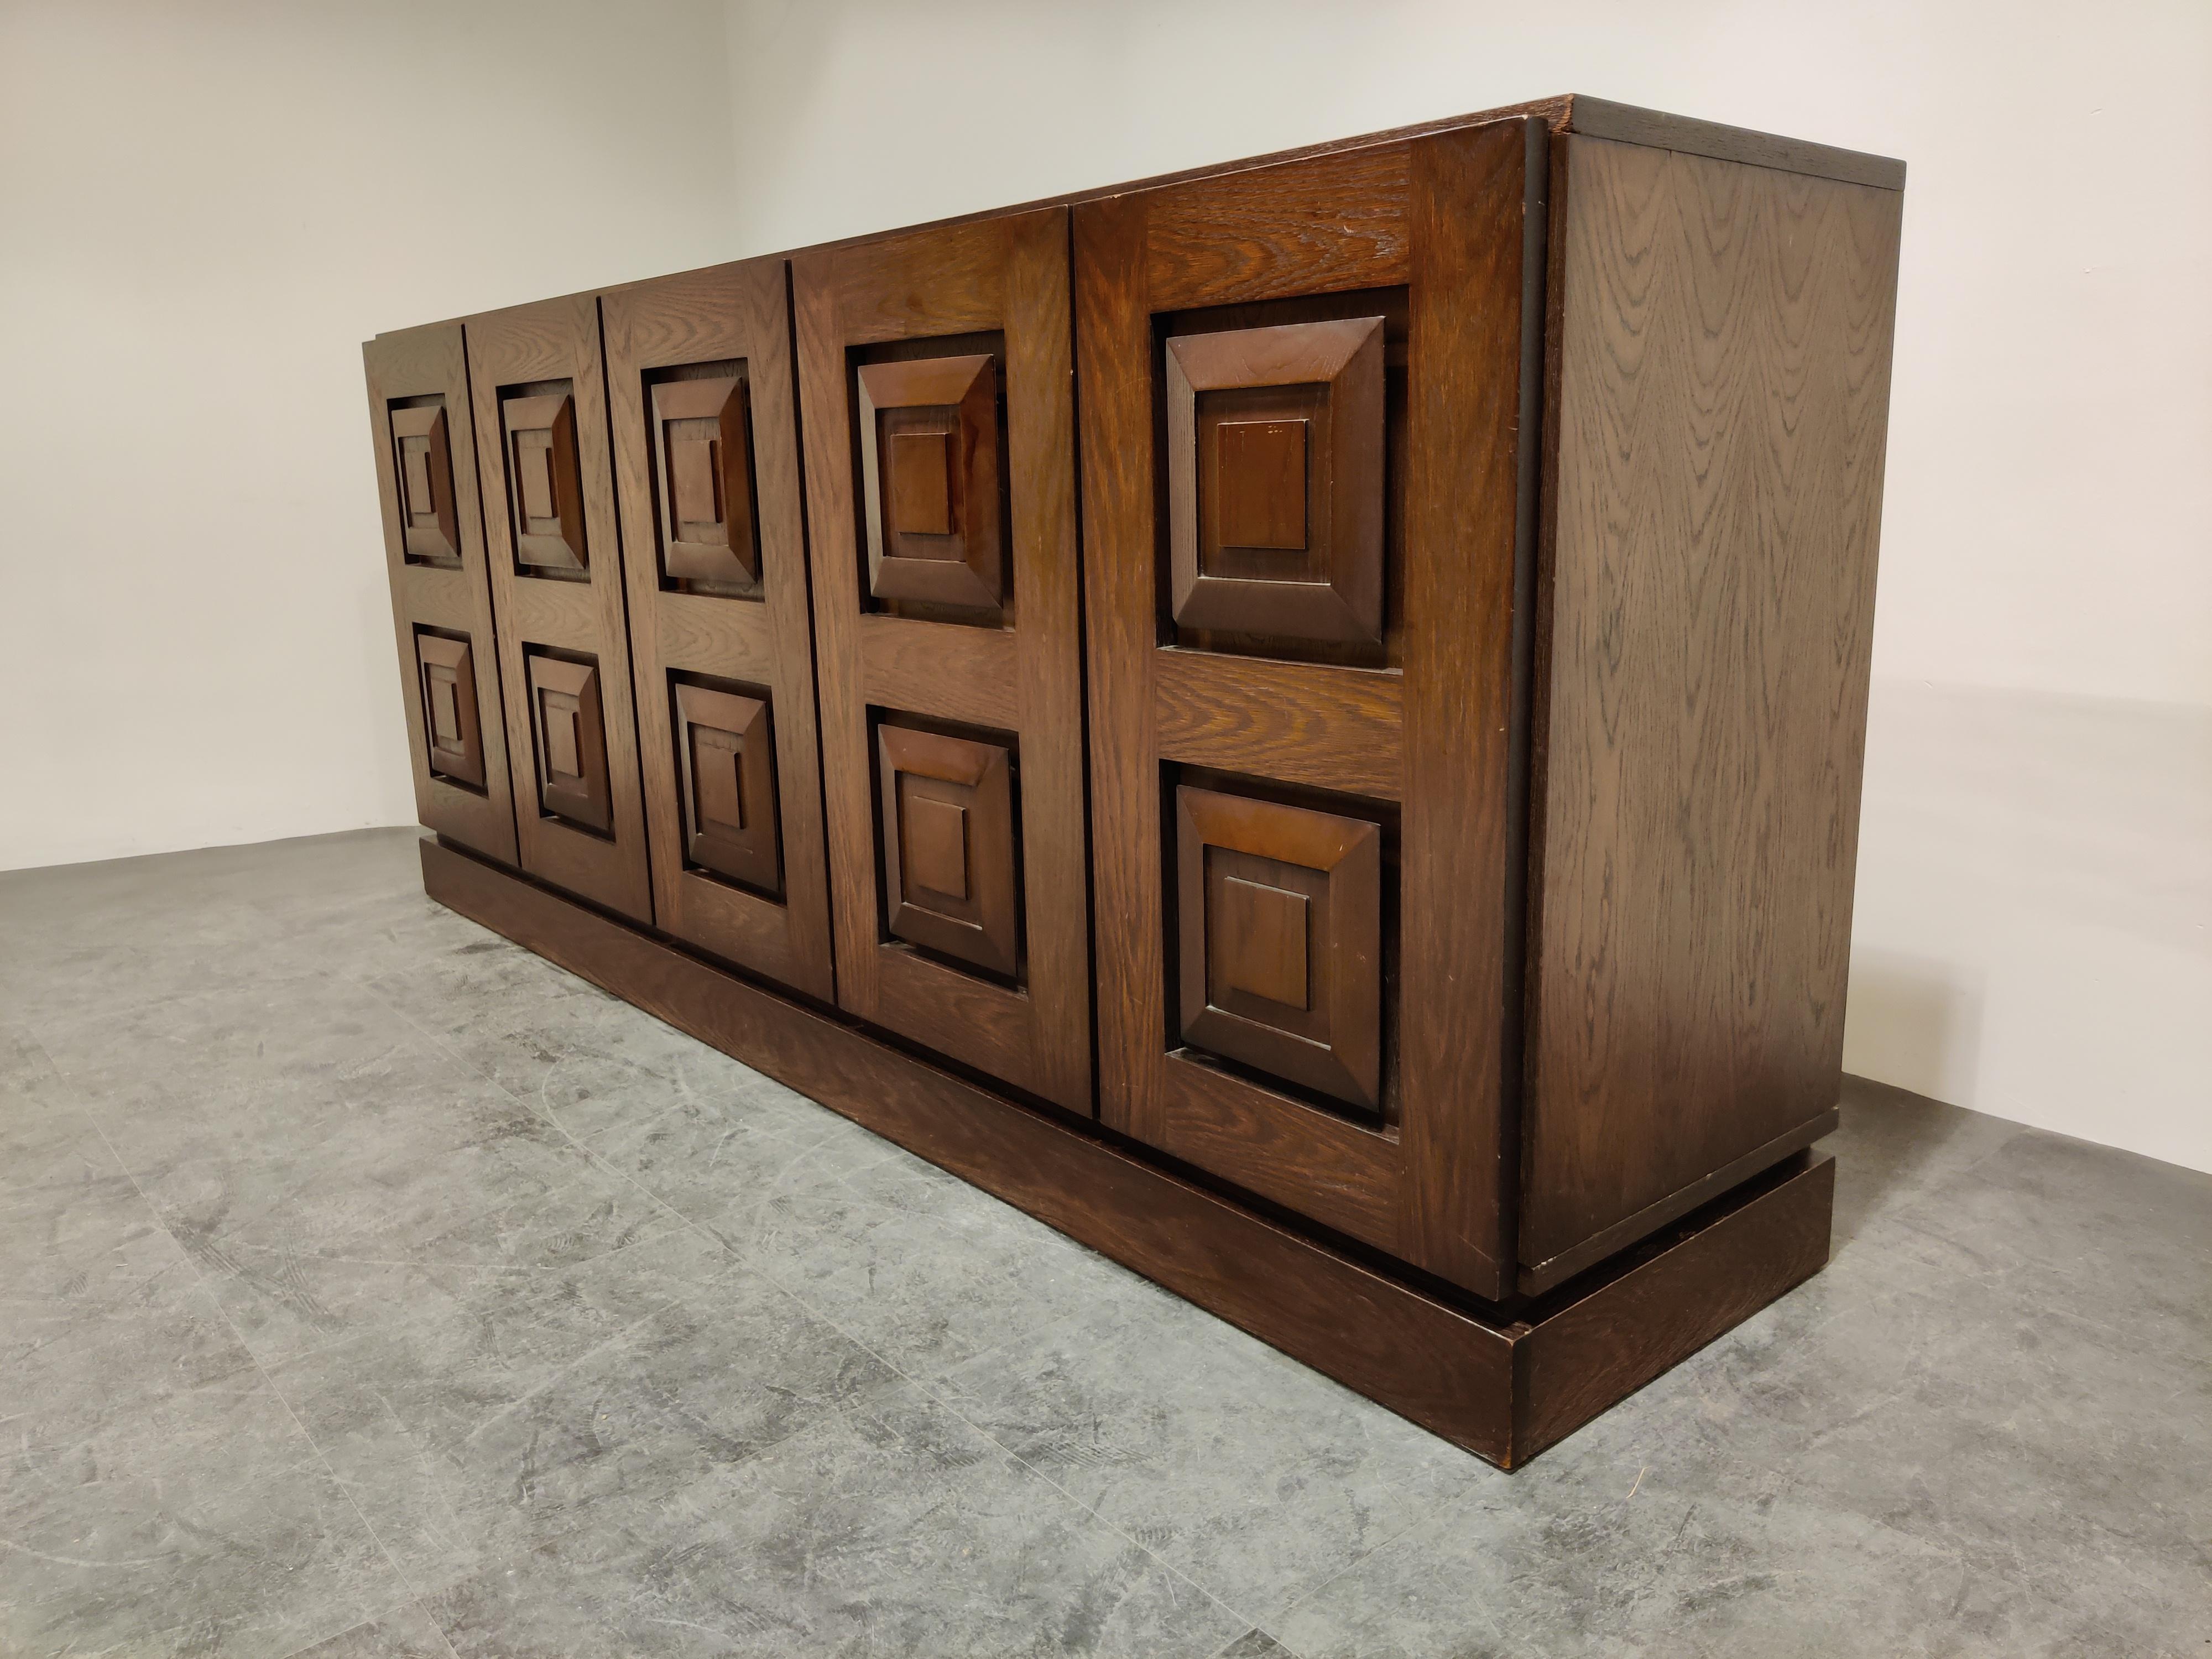 Striking Brutalist credenza with graphical door panels.

The credenza has a lot of storage space and features 5 doors.

Good condition, small damage to right top corner.

1970s, Belgium

Dimensions:

Length 270cm/106.29